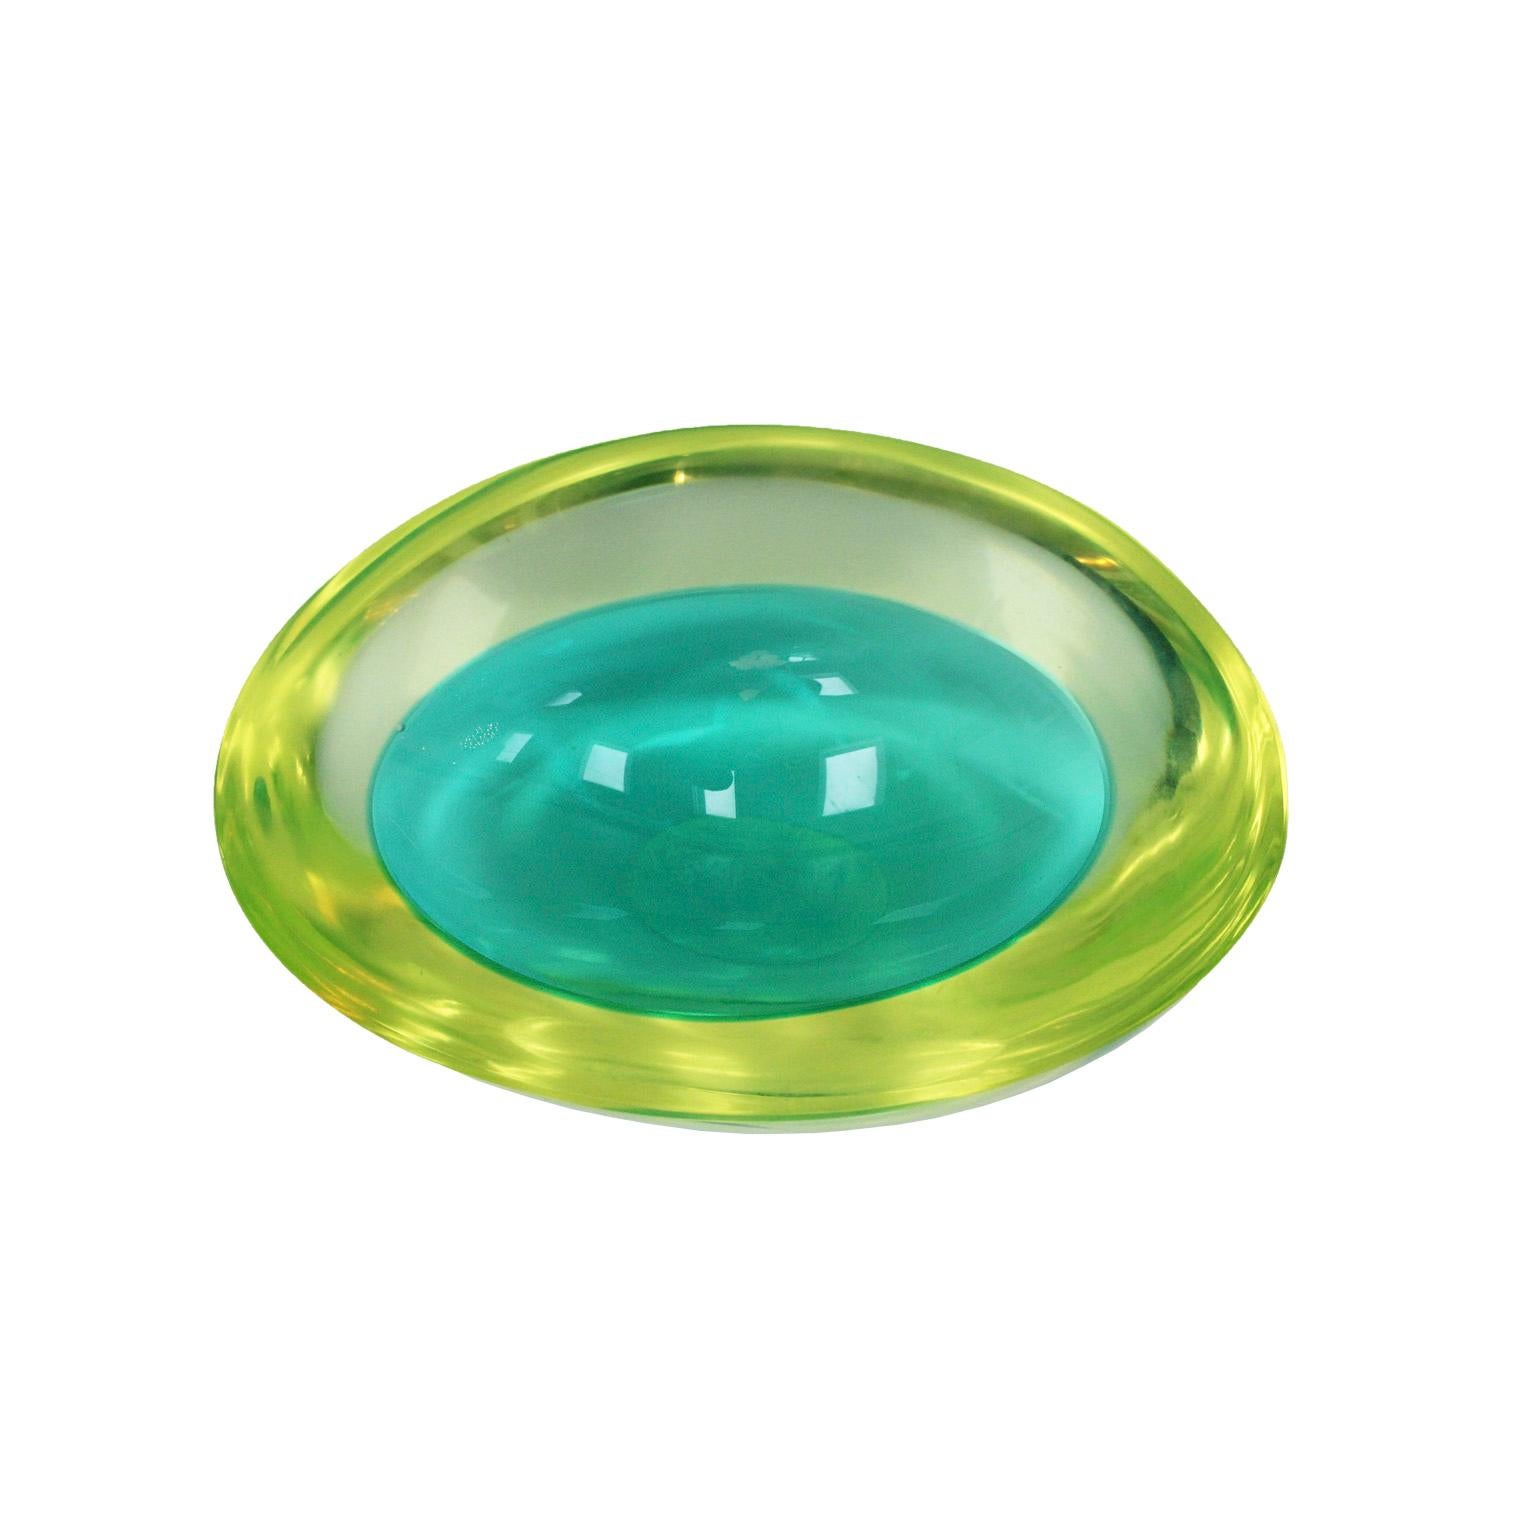 Mid-Century Modern MidCentury Turquoise and yellow Sommerso Murano Glass Bowl by Flavio Poli 1950 For Sale